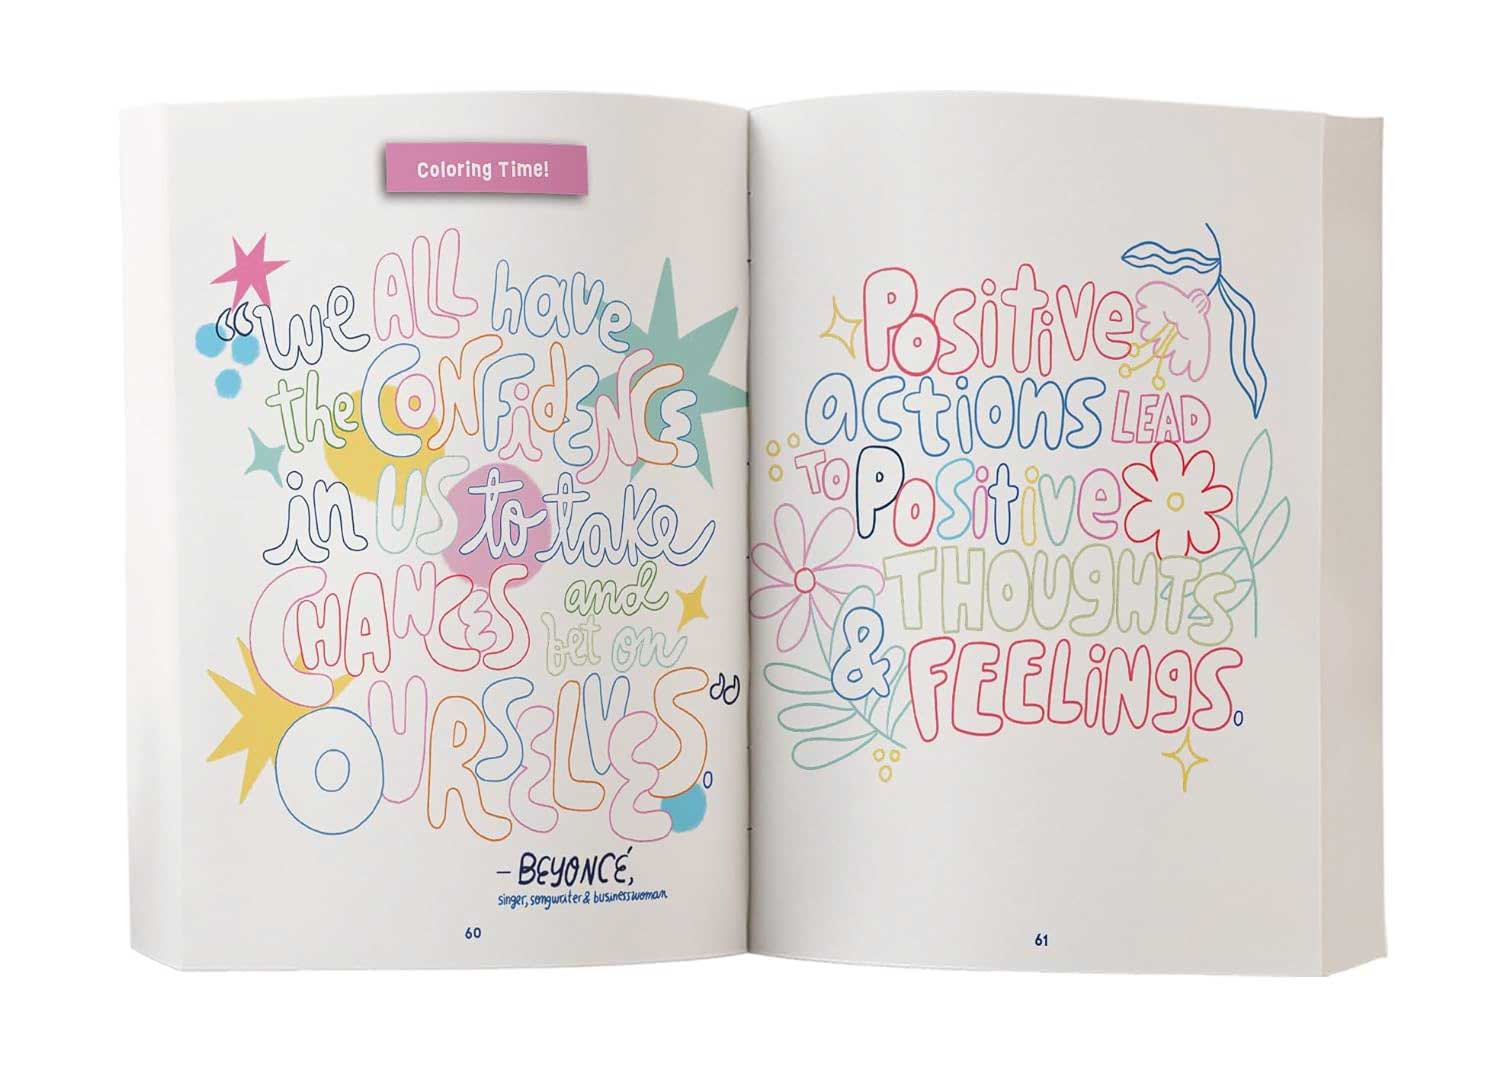 Growing Up Powerful Journal by Nona Willis Aronowitz spread 2